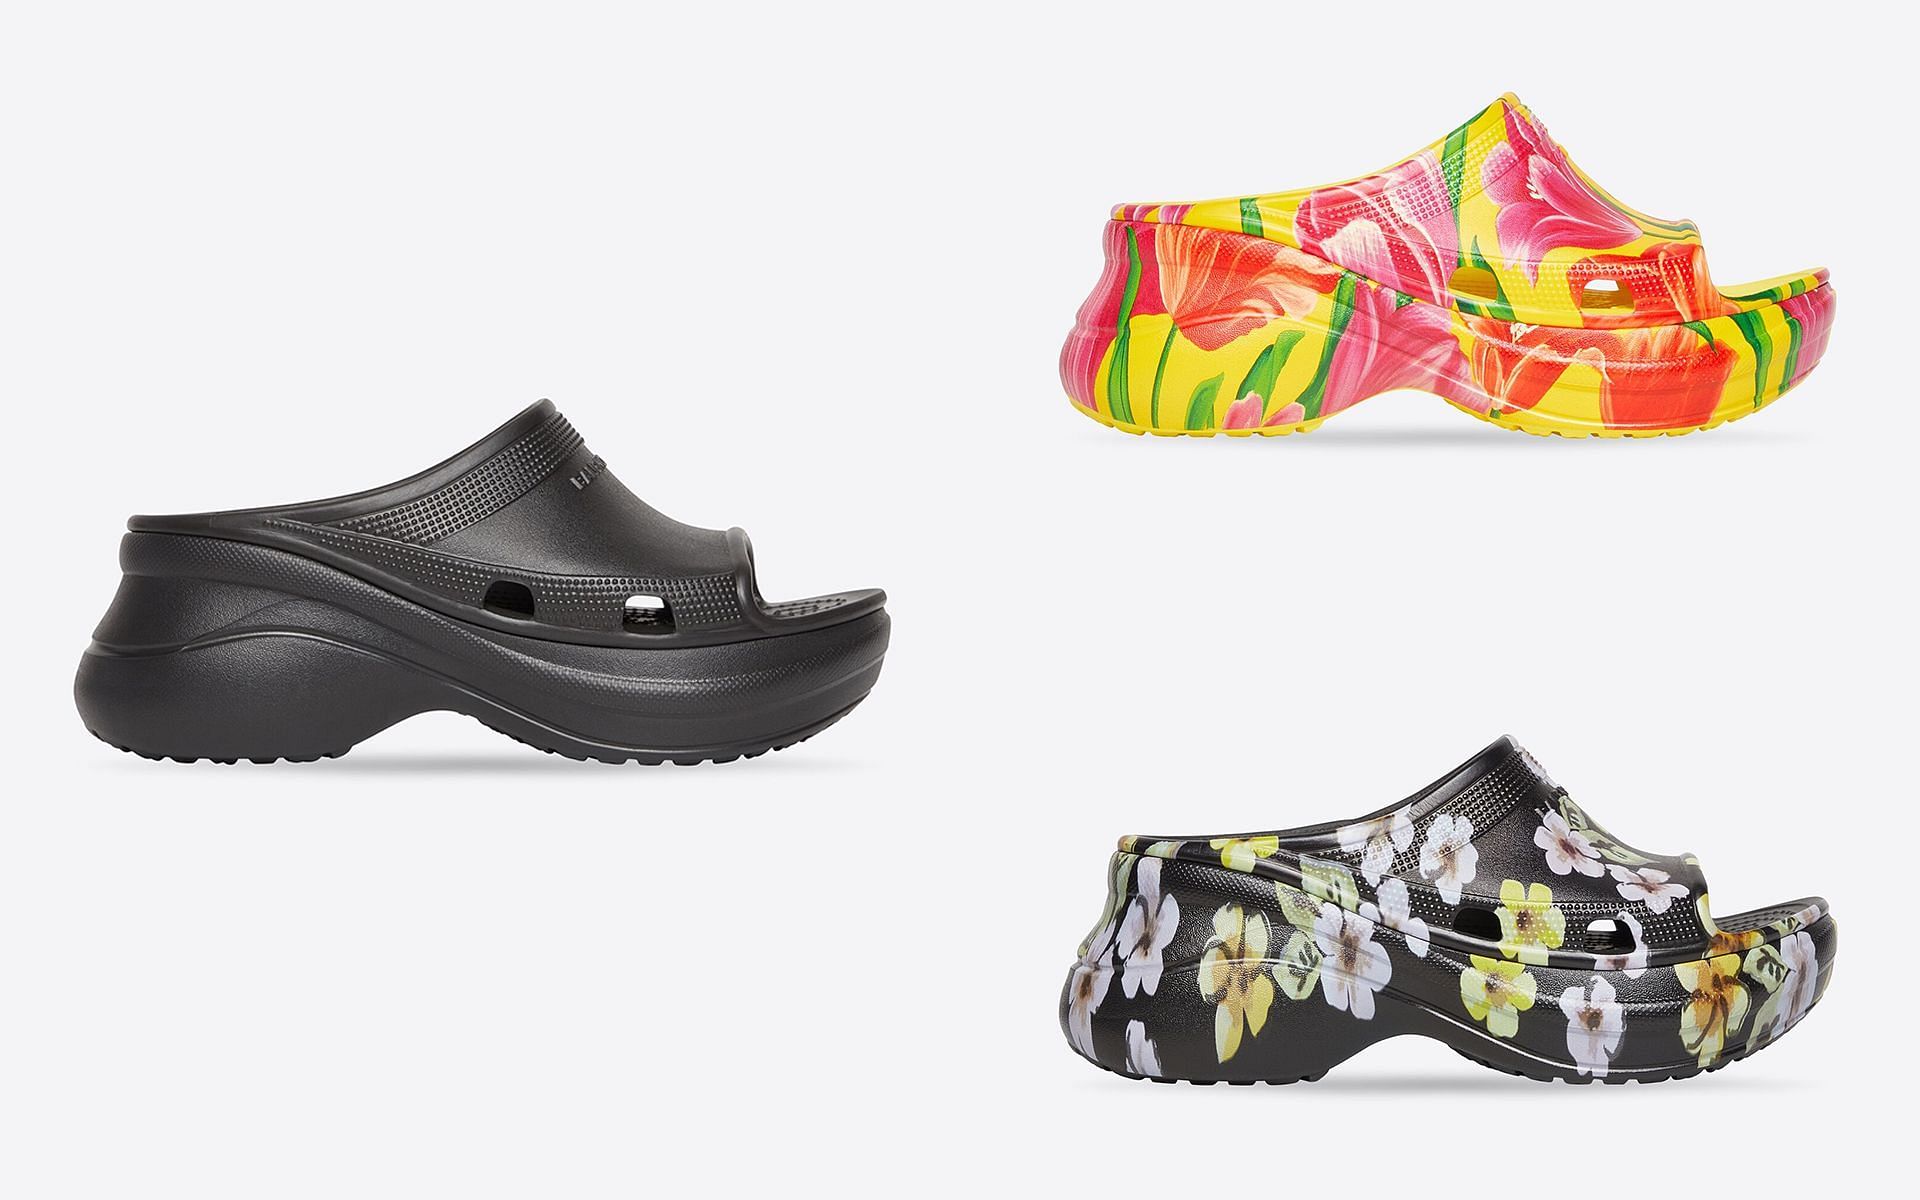 Balenciaga x Crocs Pool: Where to buy, release date, price, and 